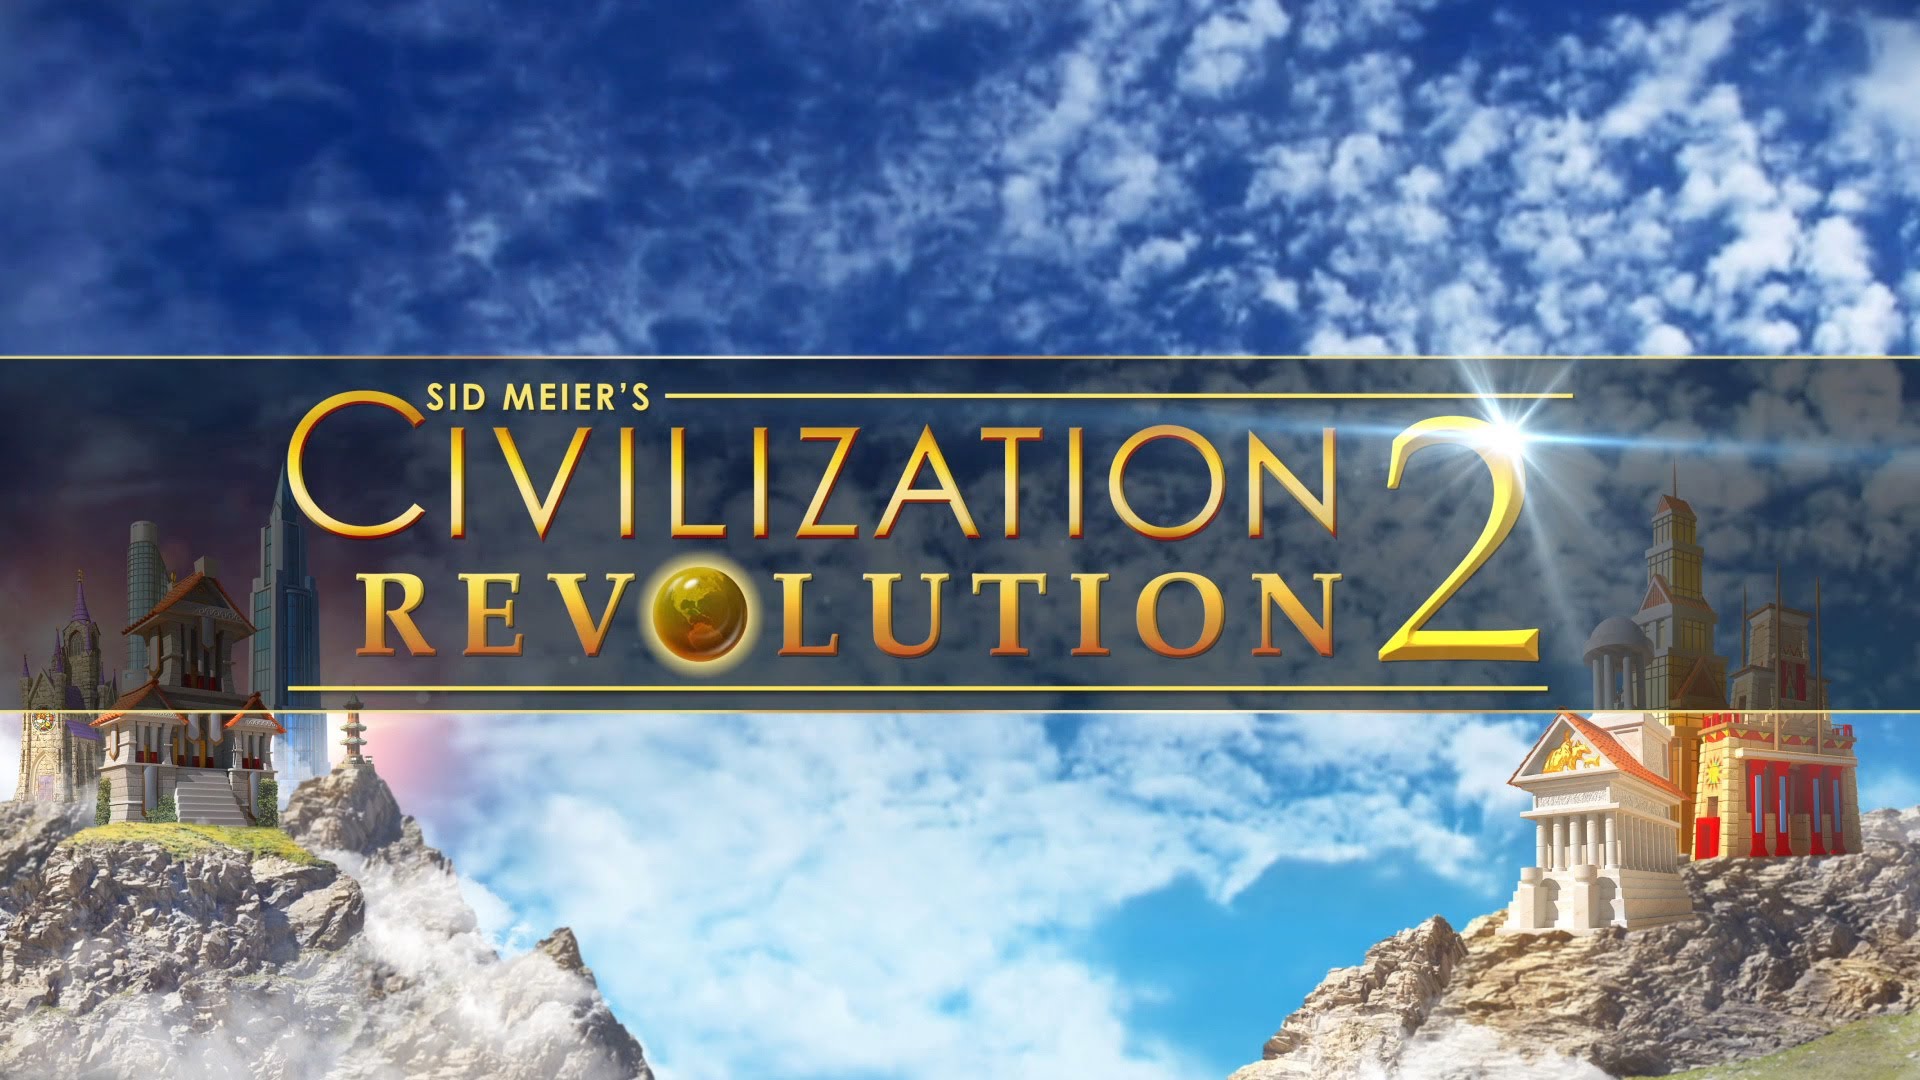 civilization revolution 2 iphone only 4 platers